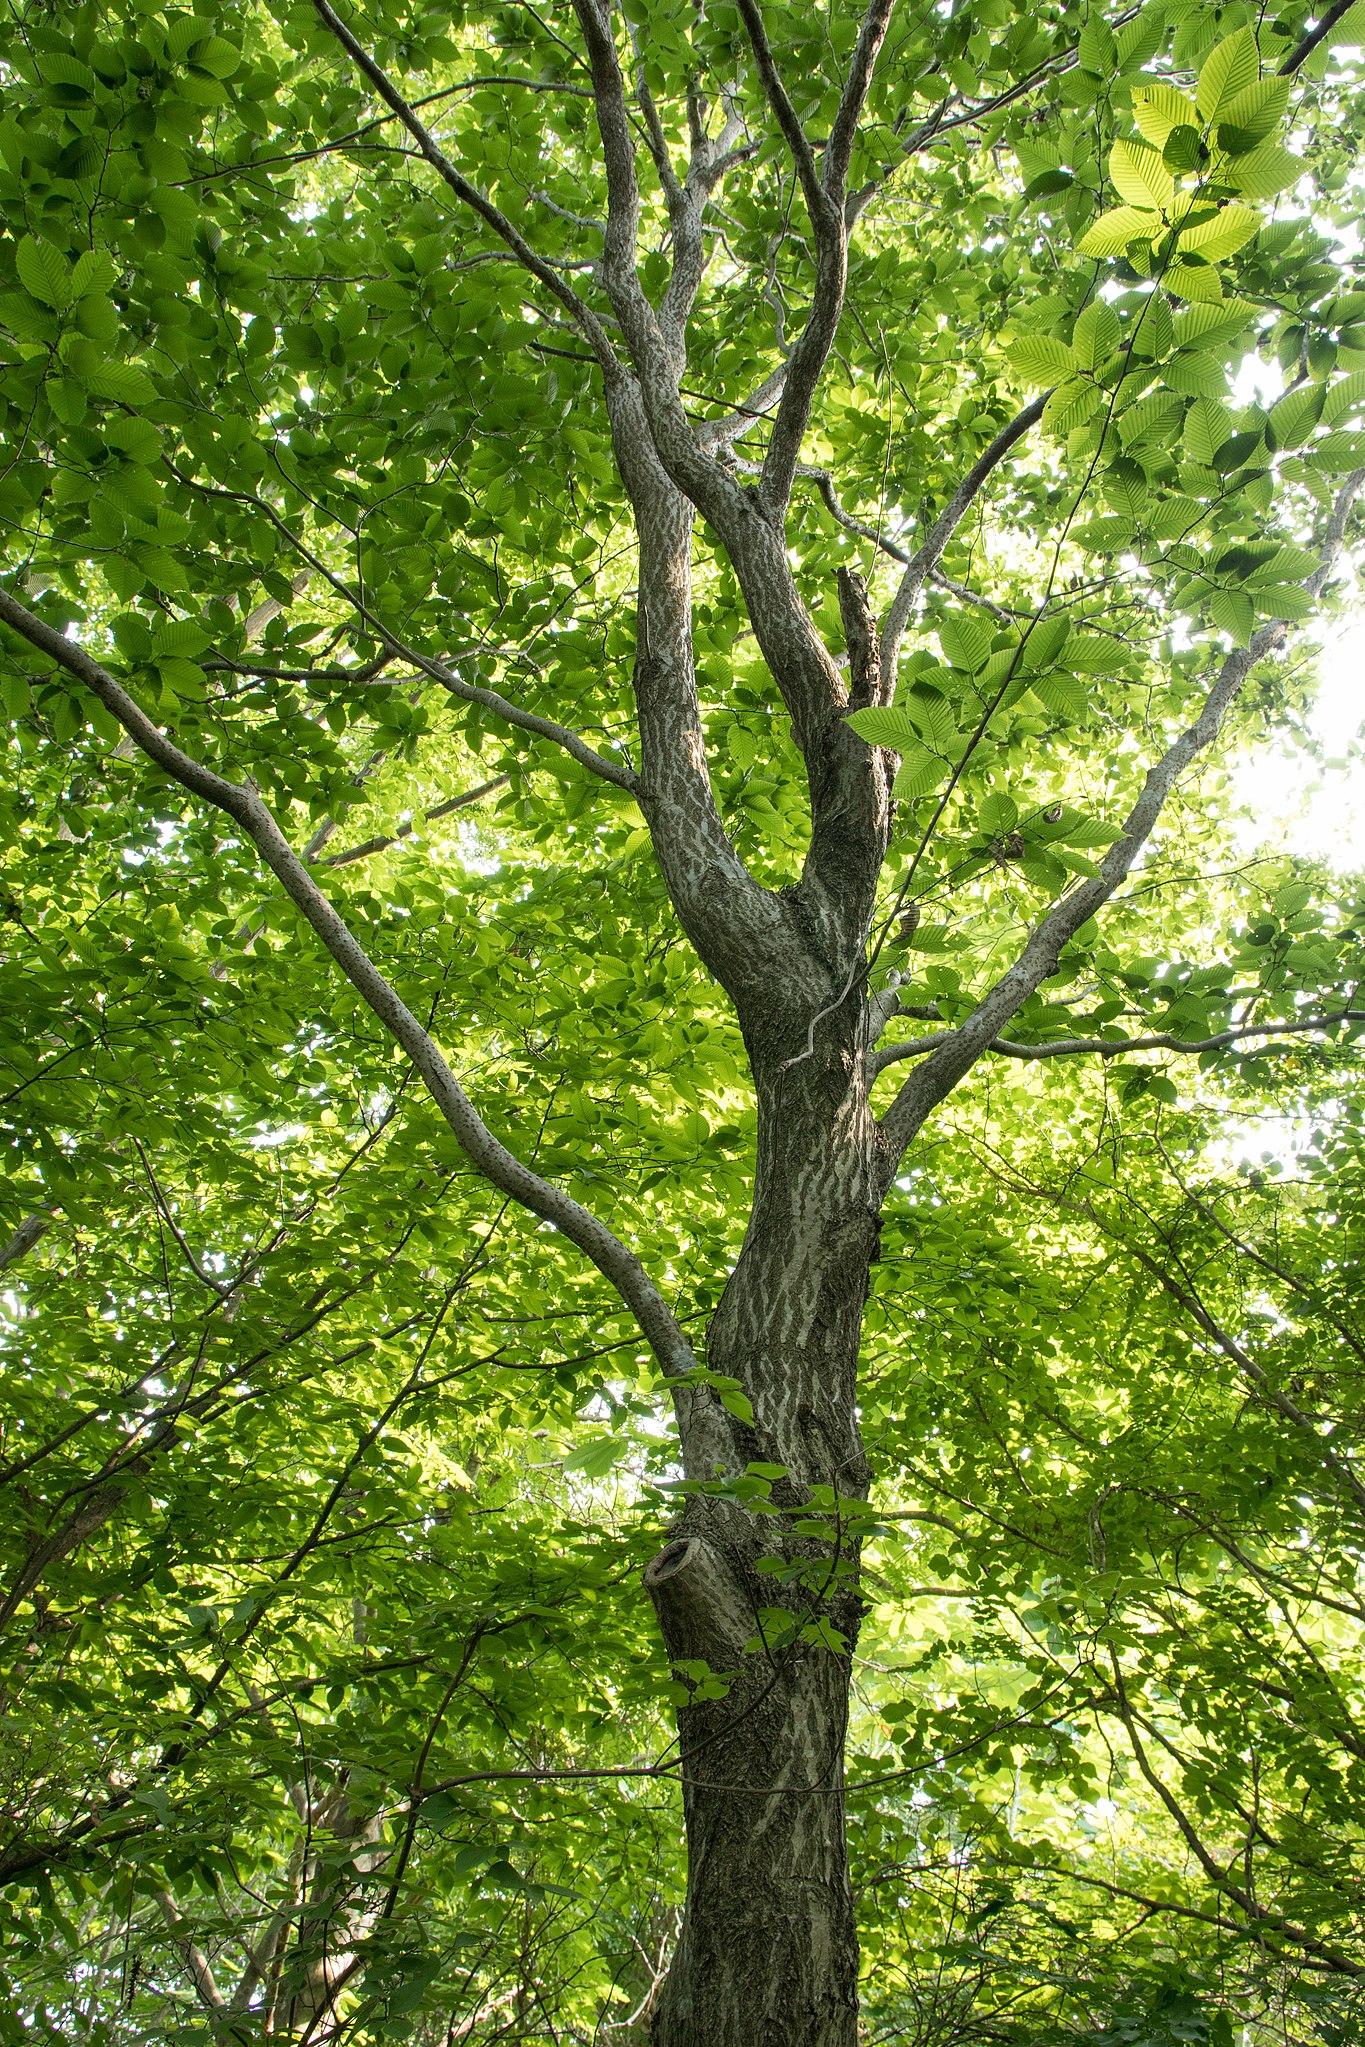 Green leaves with black-gray trunk, gray stems and branch.